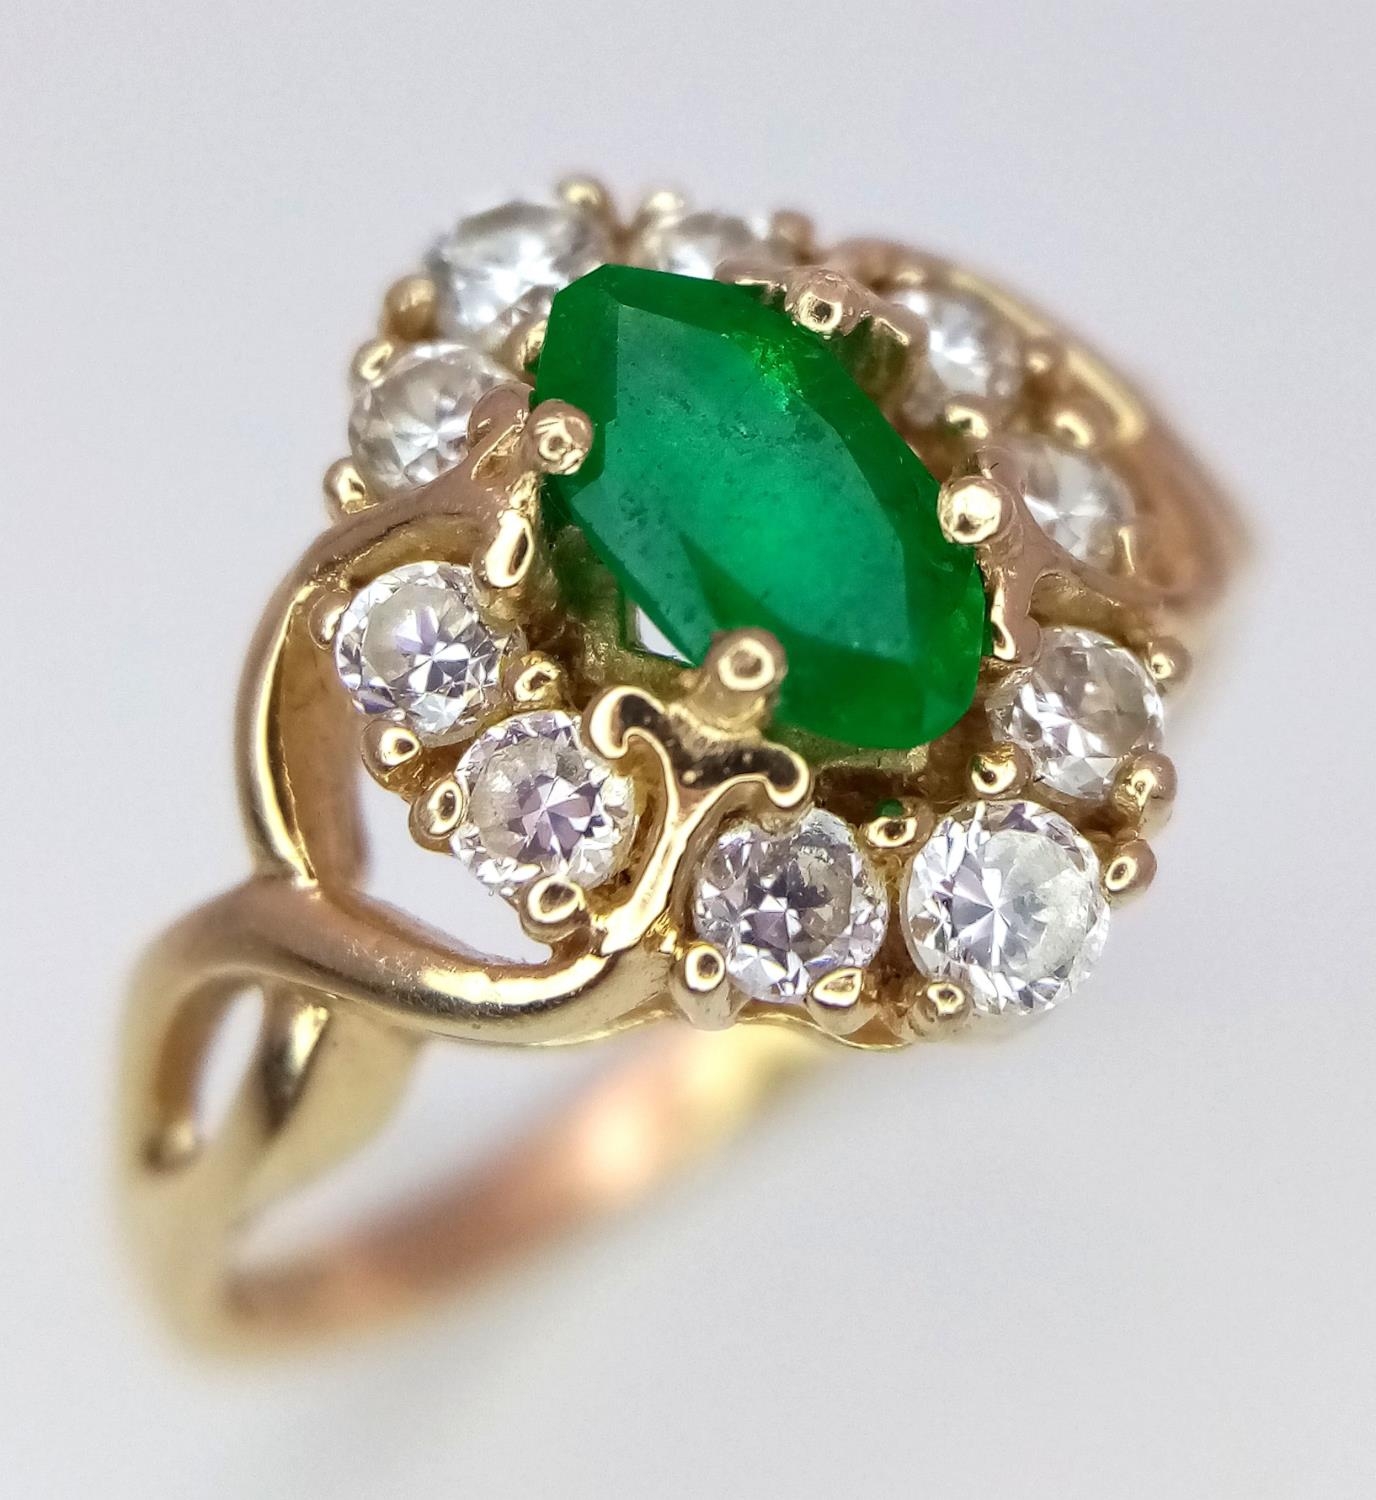 A 14K Yellow Gold Emerald and White Stone Ring. 1.2ct emerald. Size O, 3.34g total weight.